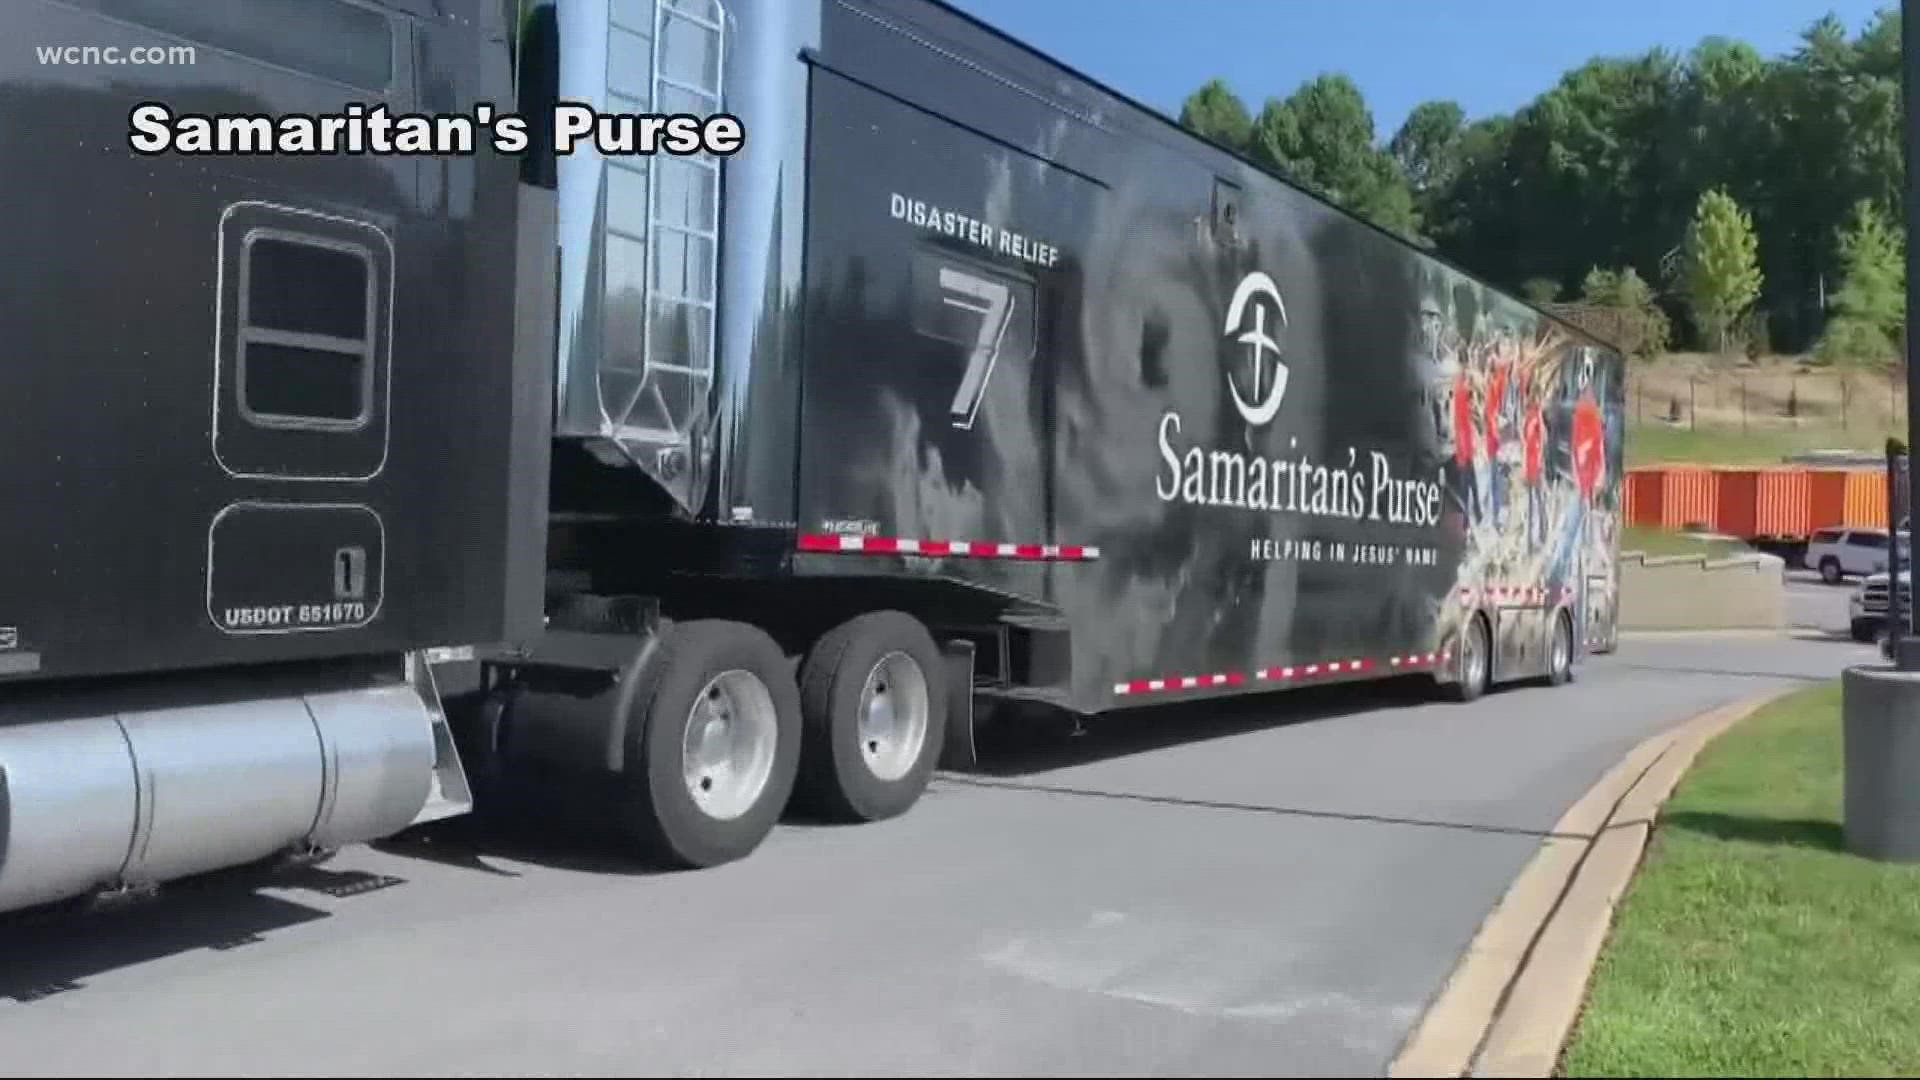 The Samaritan’s Purse deployed its large disaster relief truck from North Carolina with a stop in Alabama.